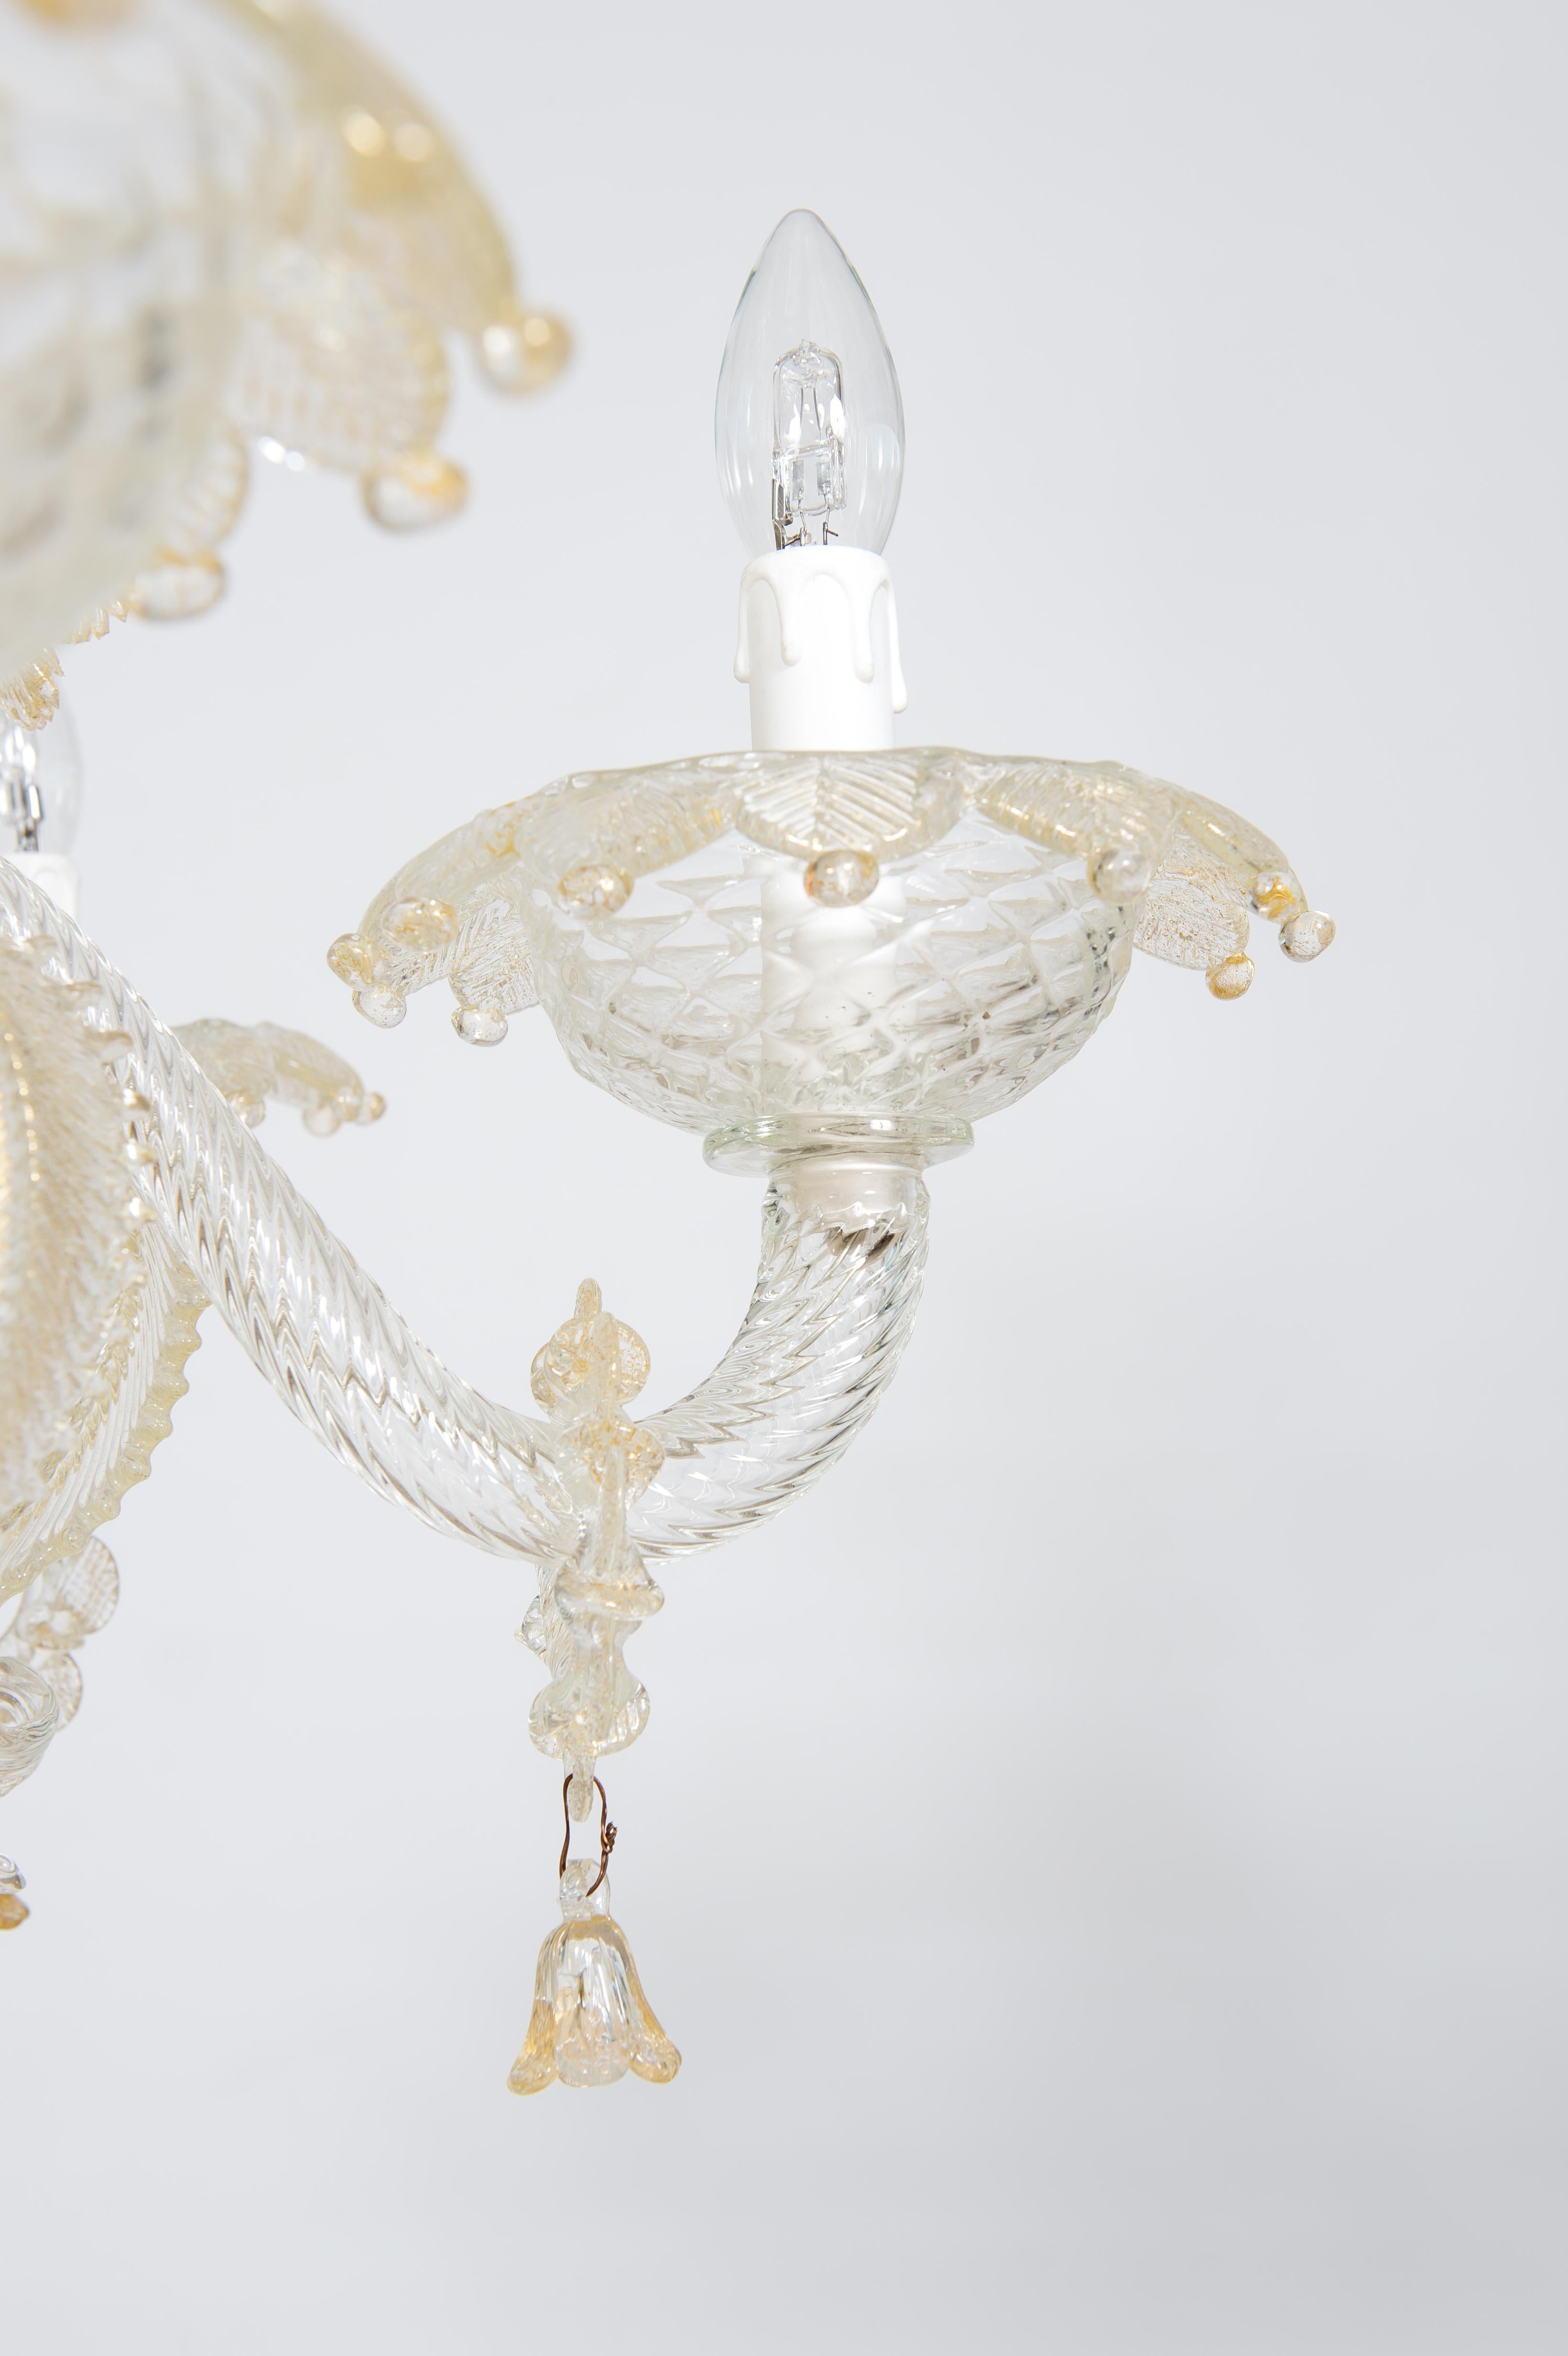 Floral Murano Glass Chandelier with “Riga Dritta” Decorations, 20th Century 1